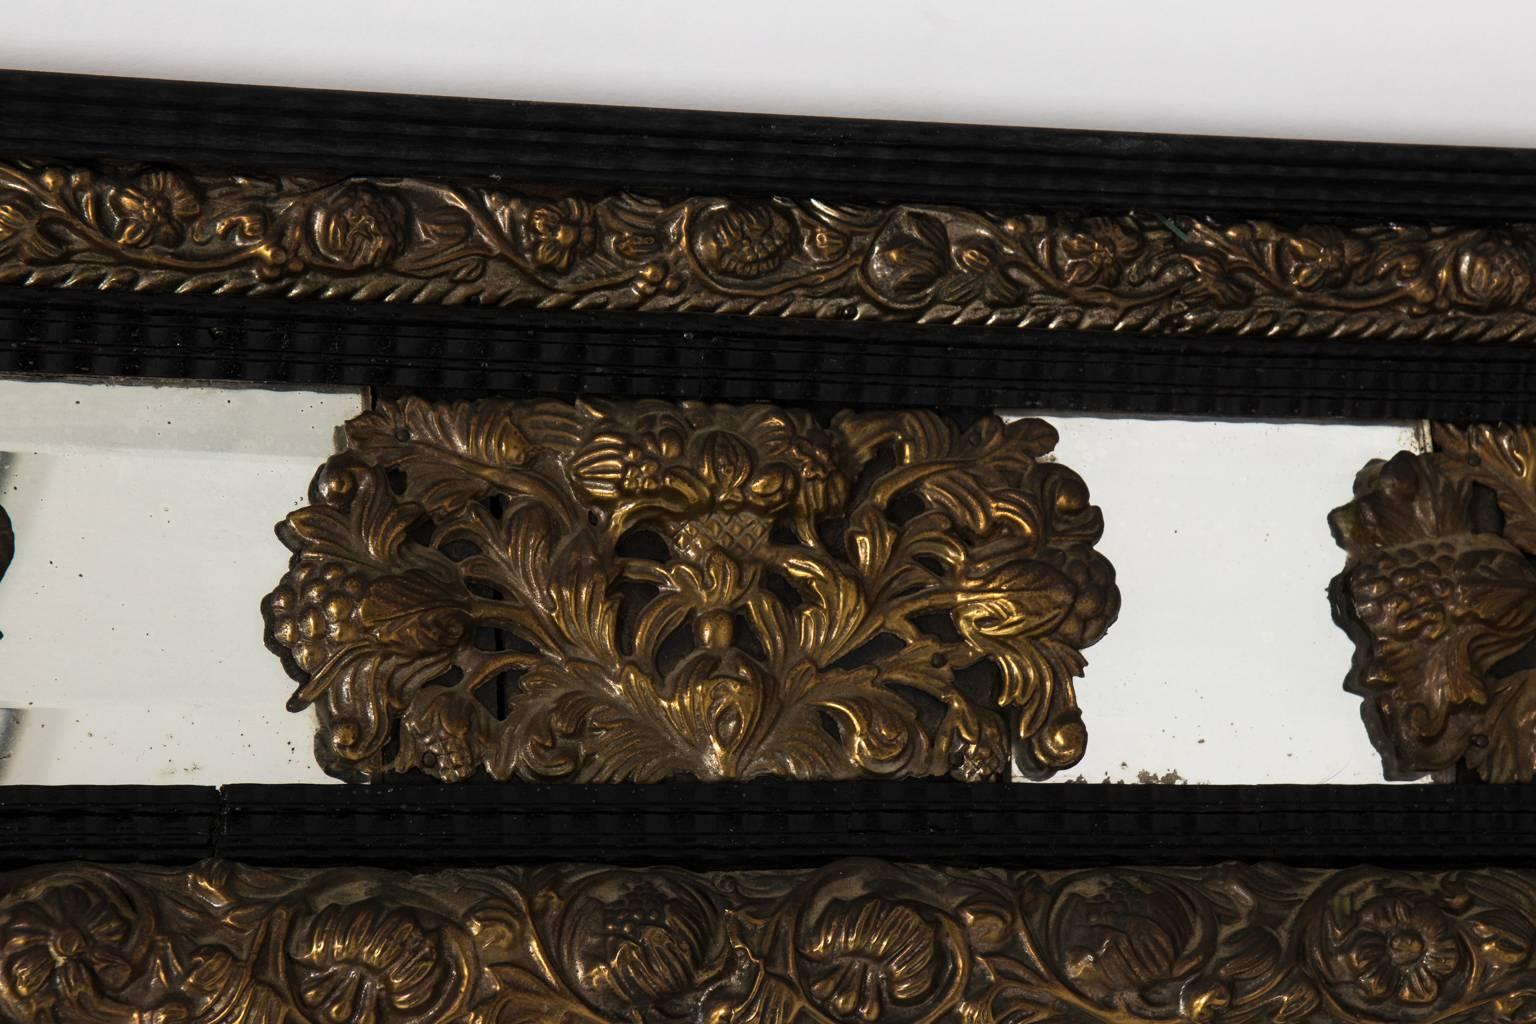 Repousse mirror with pinecone decoration in gold gilt with black lacquered trim, circa early 20th century.
   